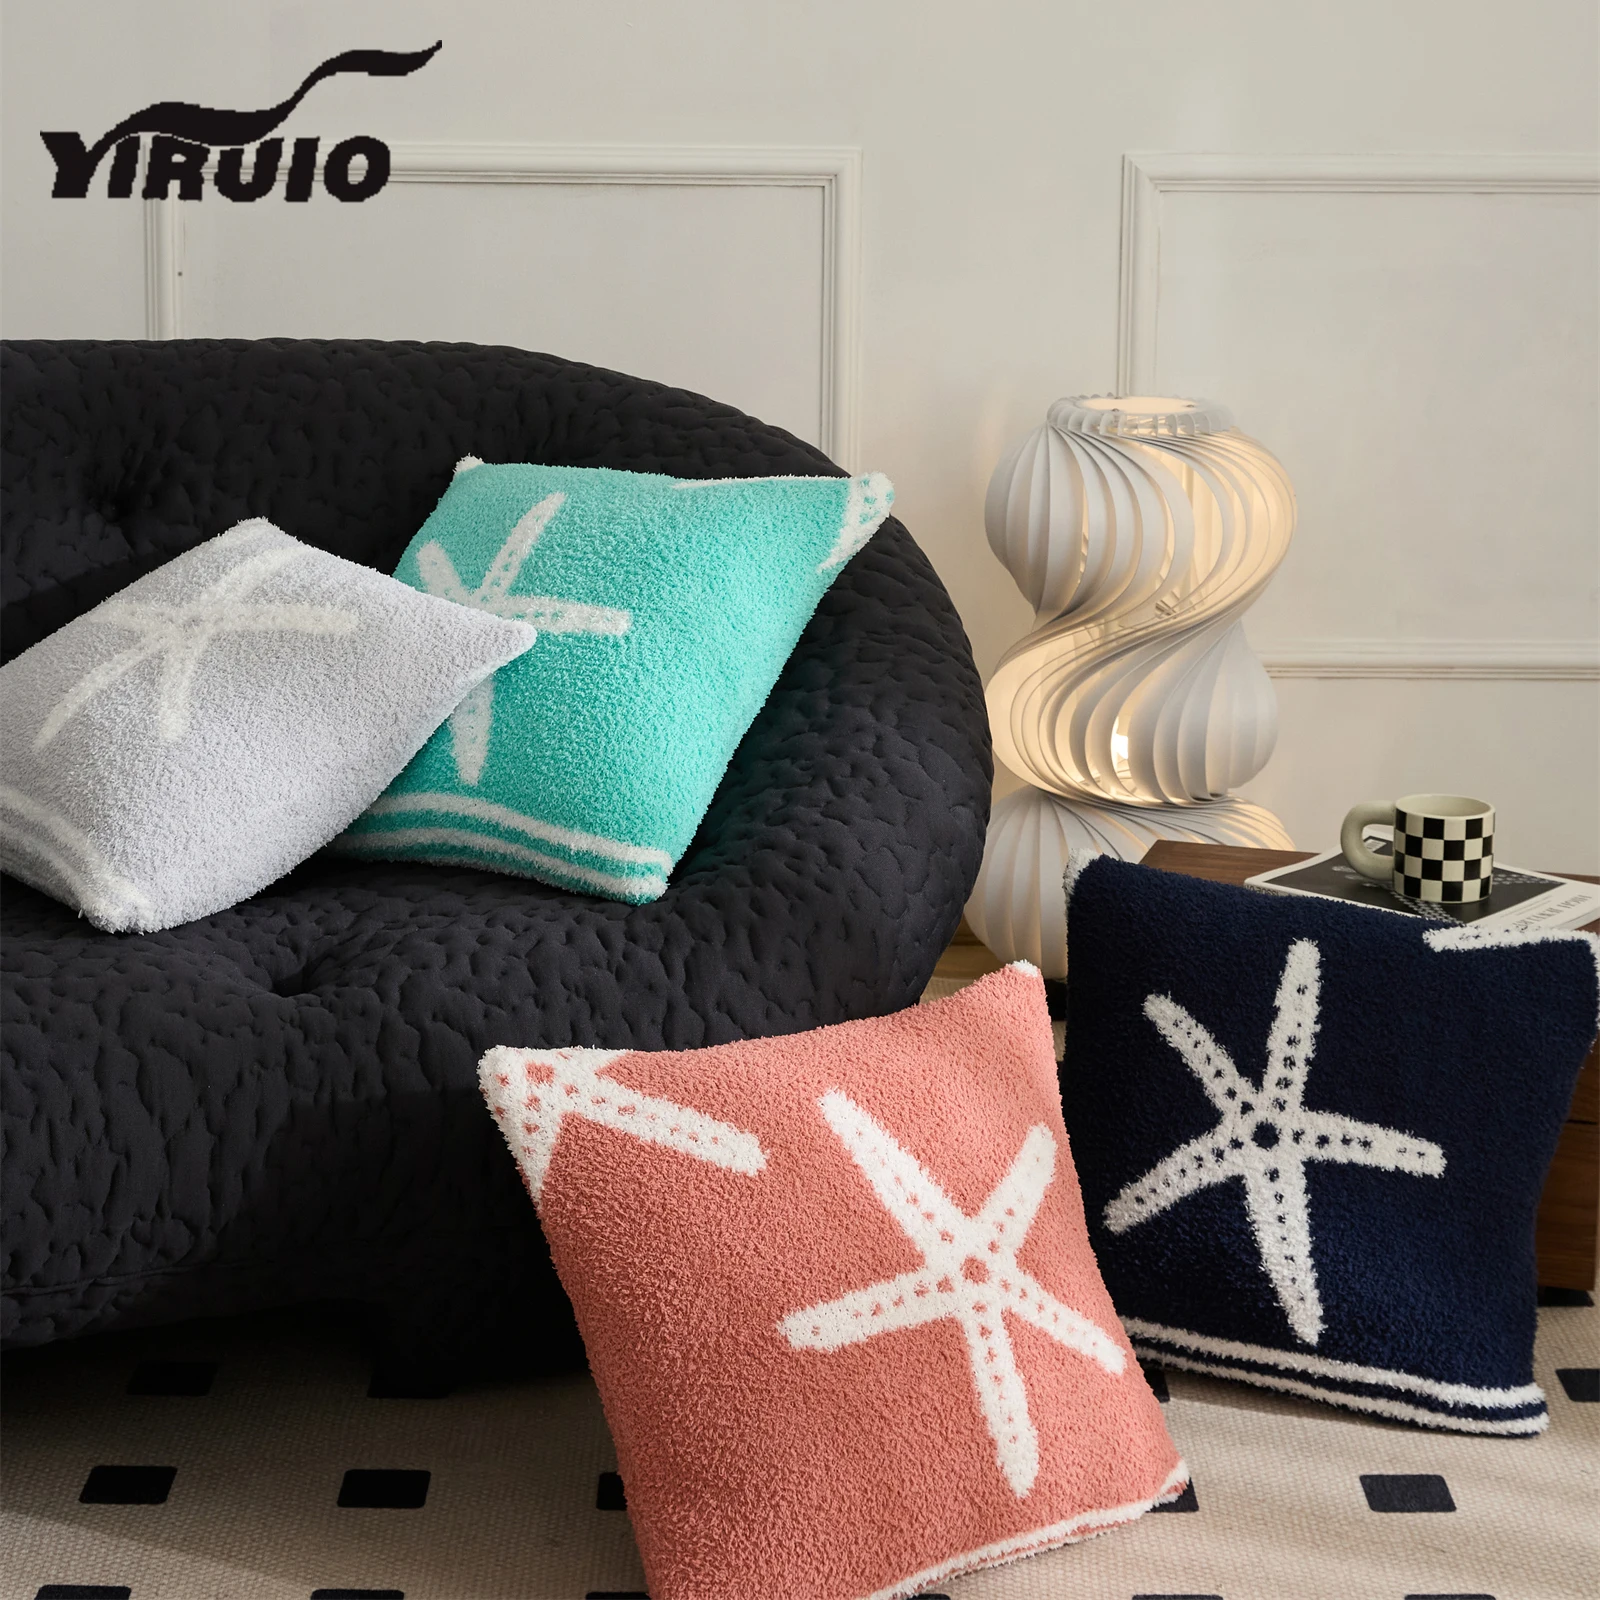 

YIRUIO Cute Starfish Pattern Cushion Cover 45*45cm Living Room Bedroom Decorative Pillow Case For Sofa Bed Downy Pillow Cover